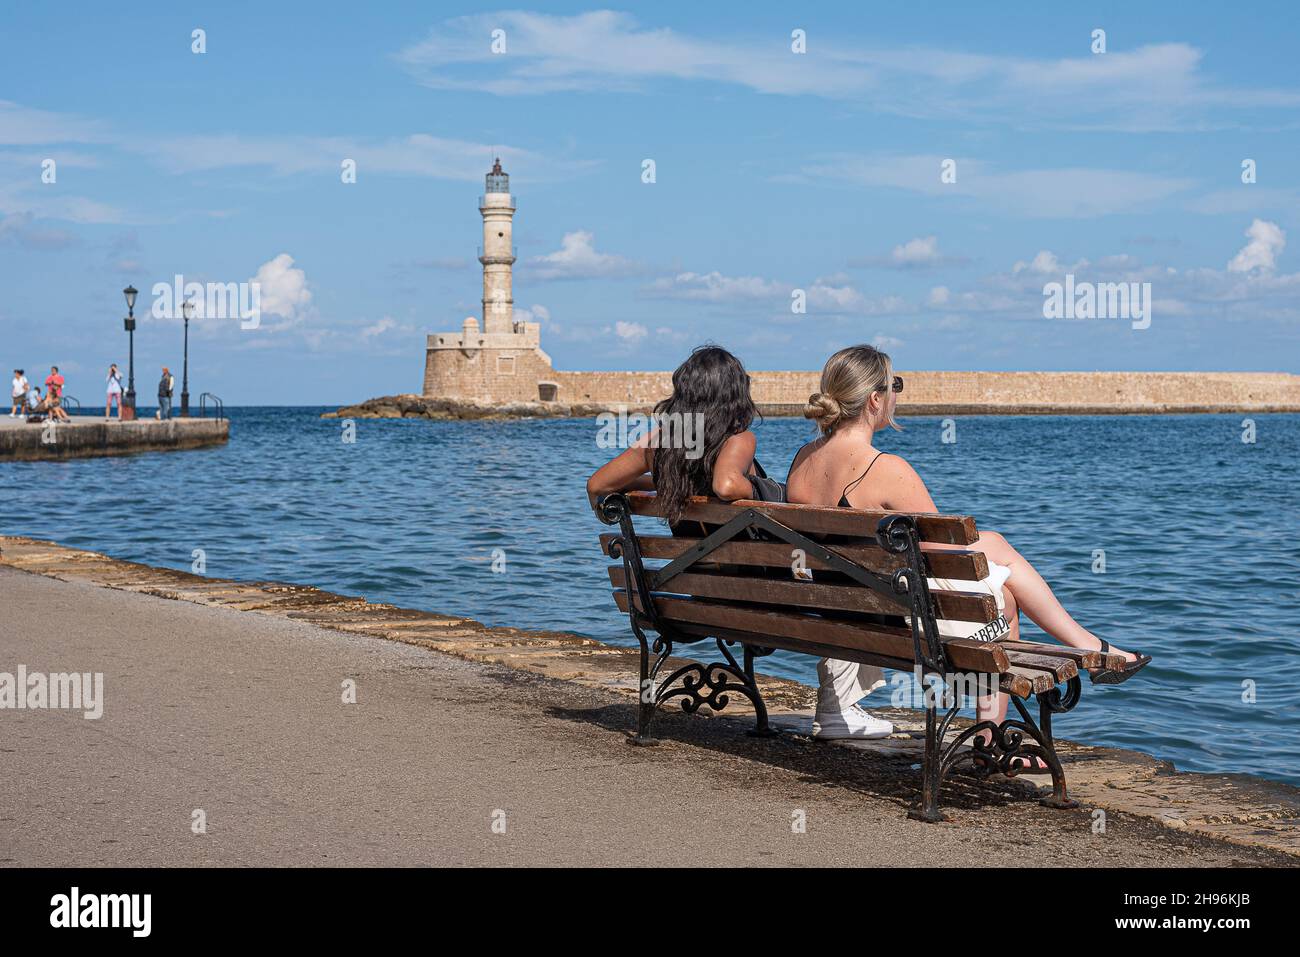 Two women sitting on a bench in the venetian harbour of Chania, Crete, Greece, October 18, 2021 Stock Photo